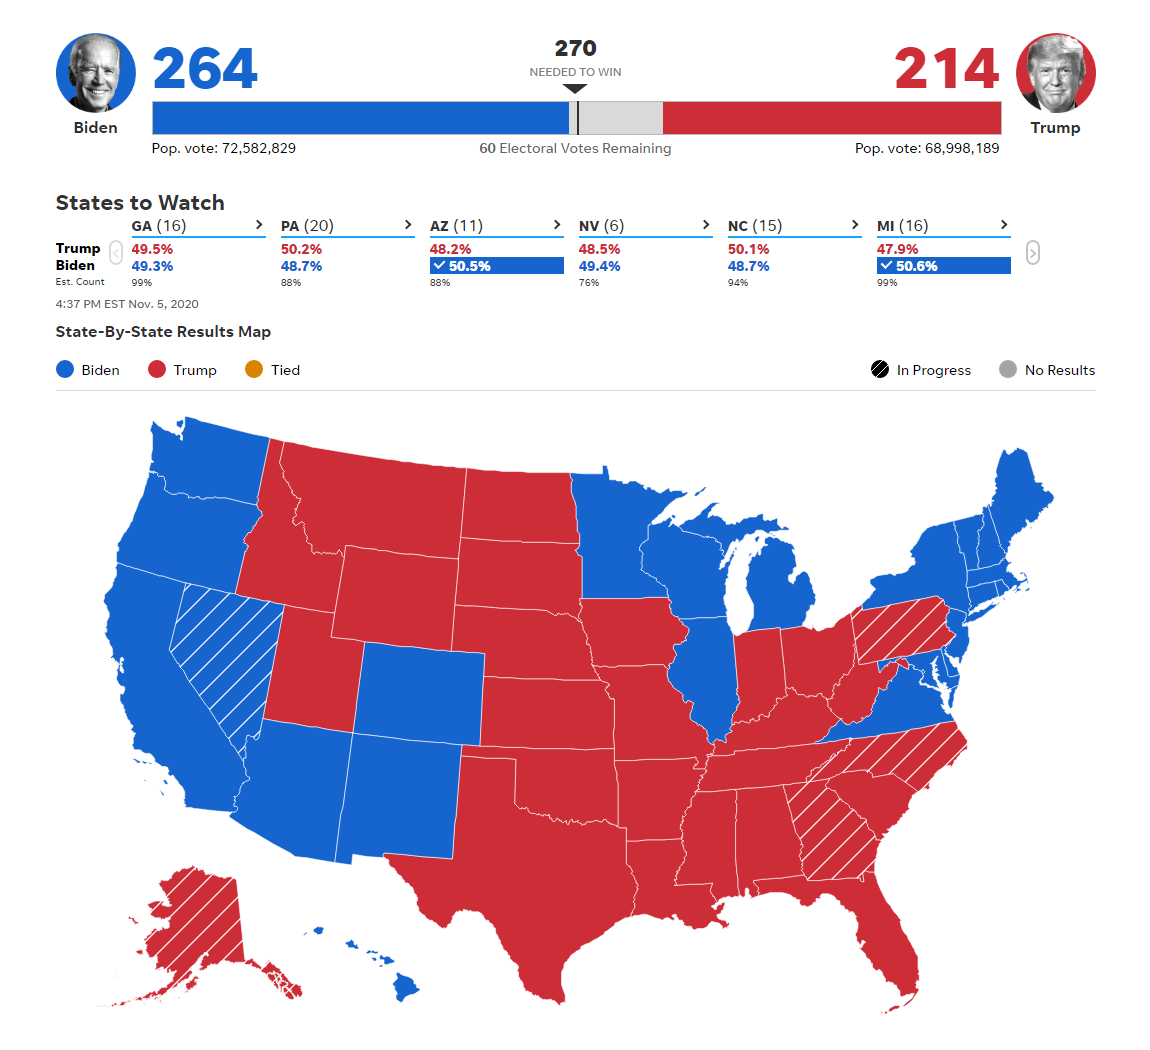 Election Maps Visualizing 2020 U.S. Presidential Electoral Vote Results